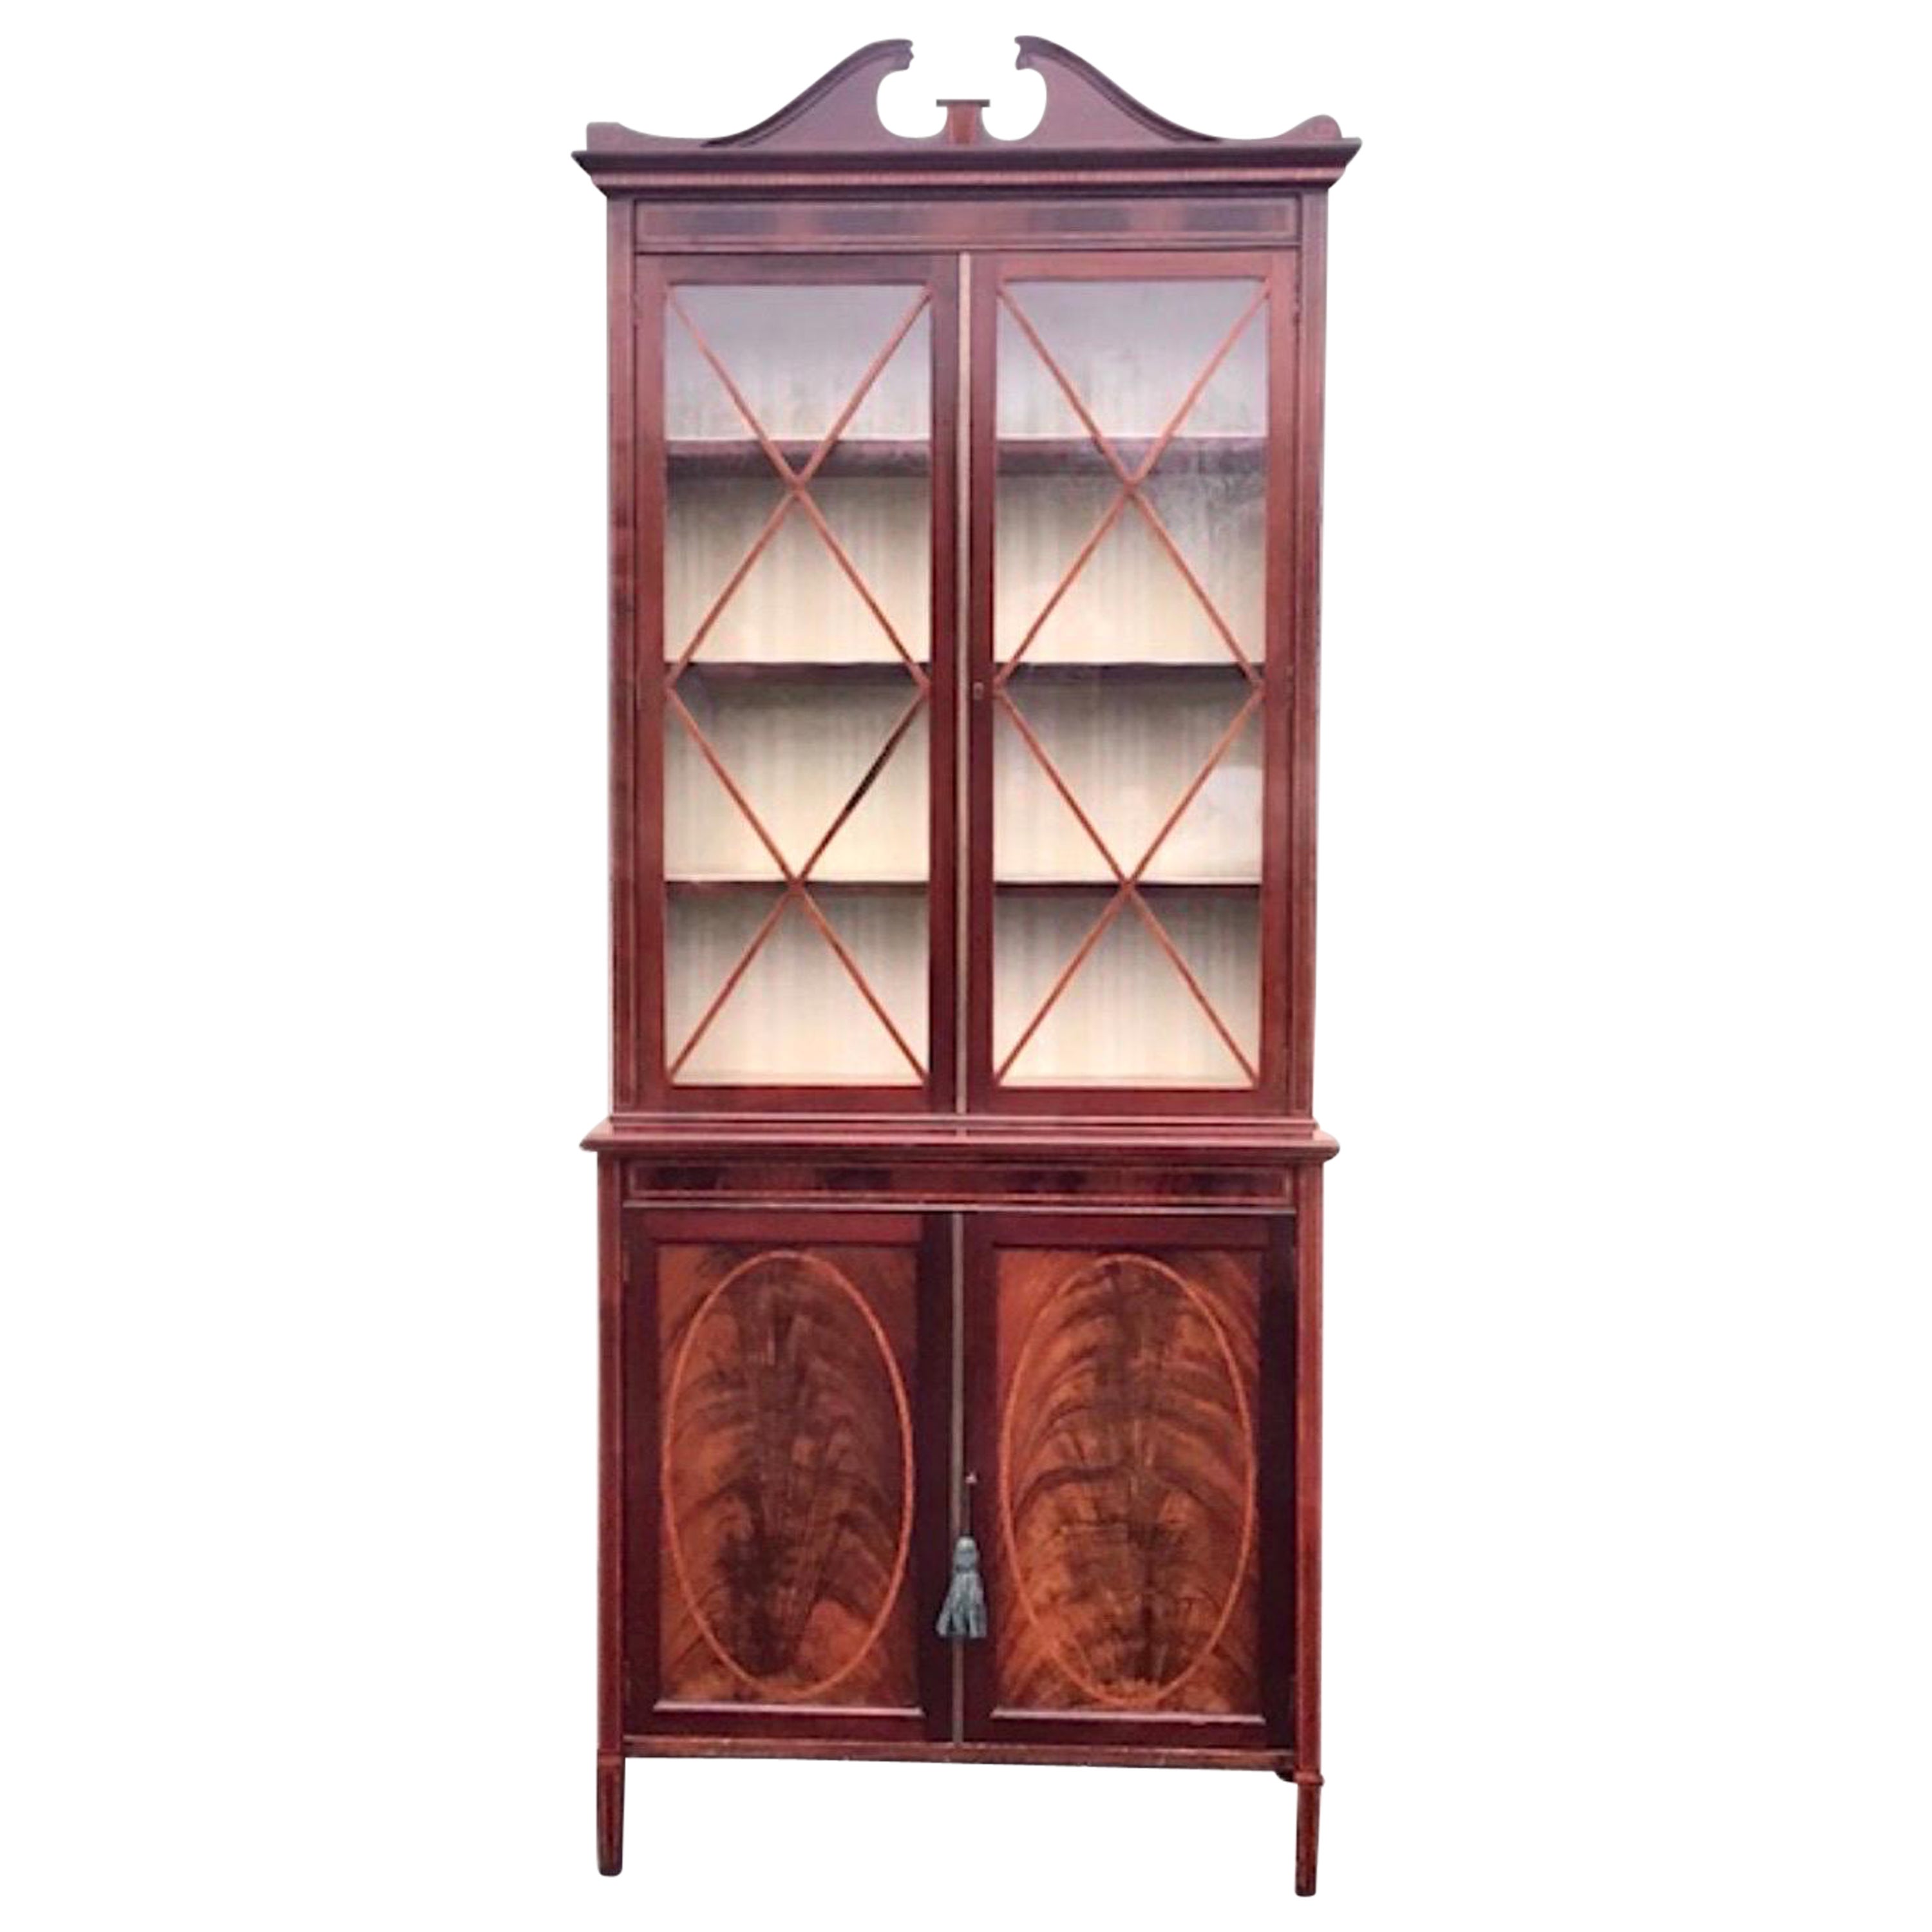 Antique Edwardian Inlaid Mahogany Narrow Cabinet, Bookcase For Sale